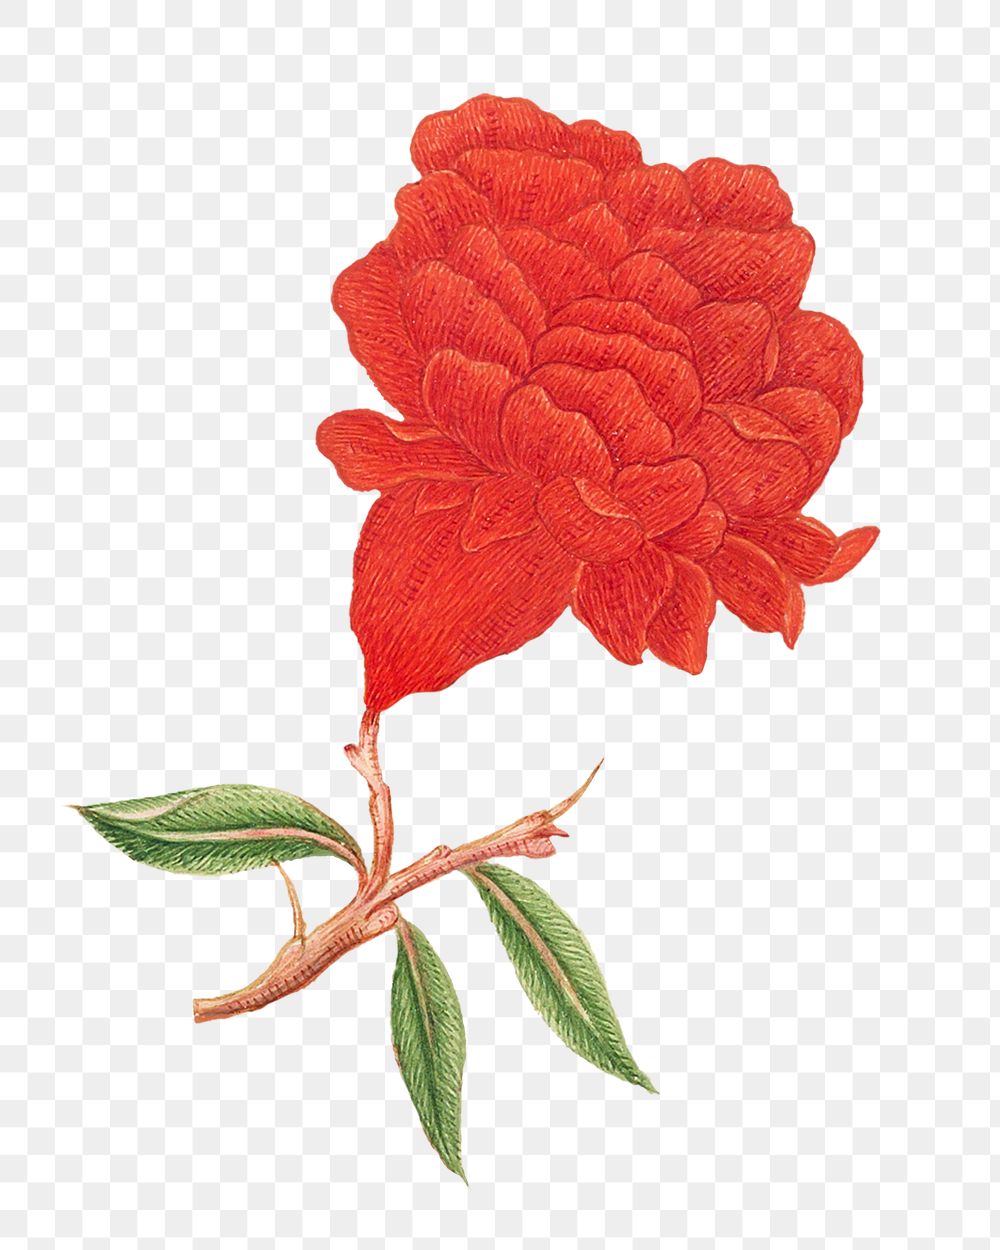 Vintage red blossoms png illustration, remixed from the 18th-century artworks from the Smithsonian archive.